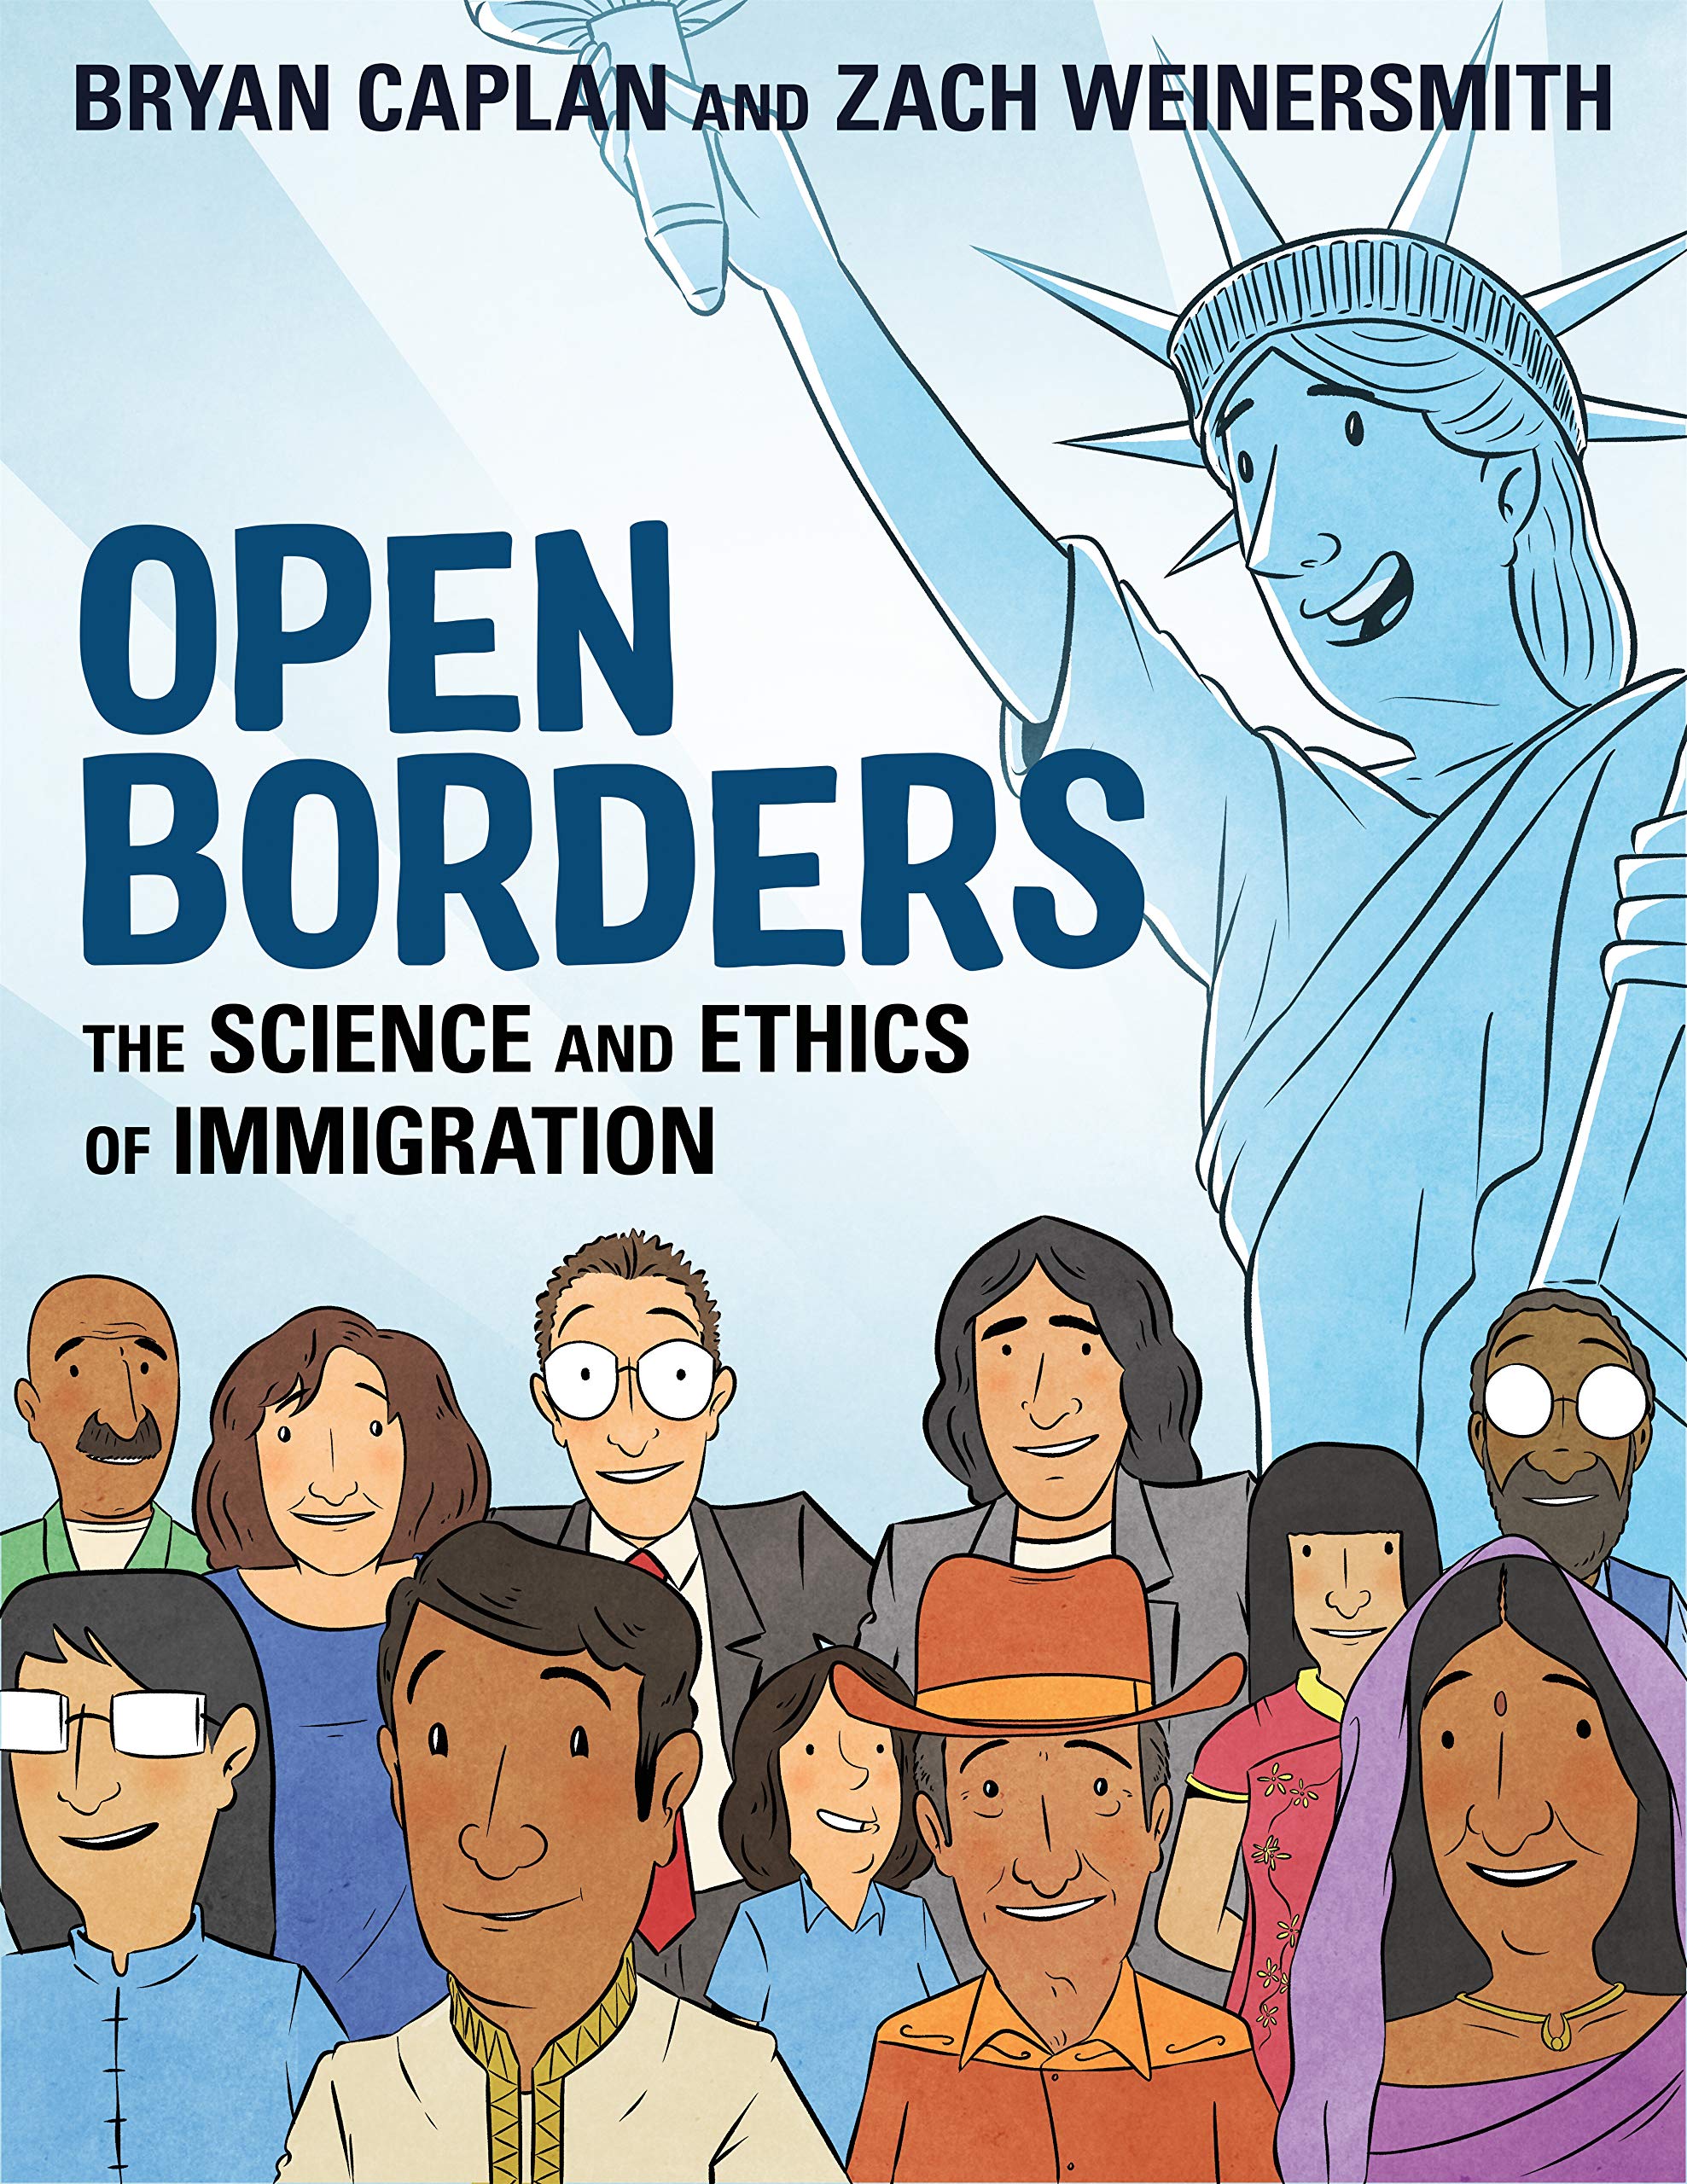 You are currently viewing Bryan Caplan’s Open Borders book: considerations